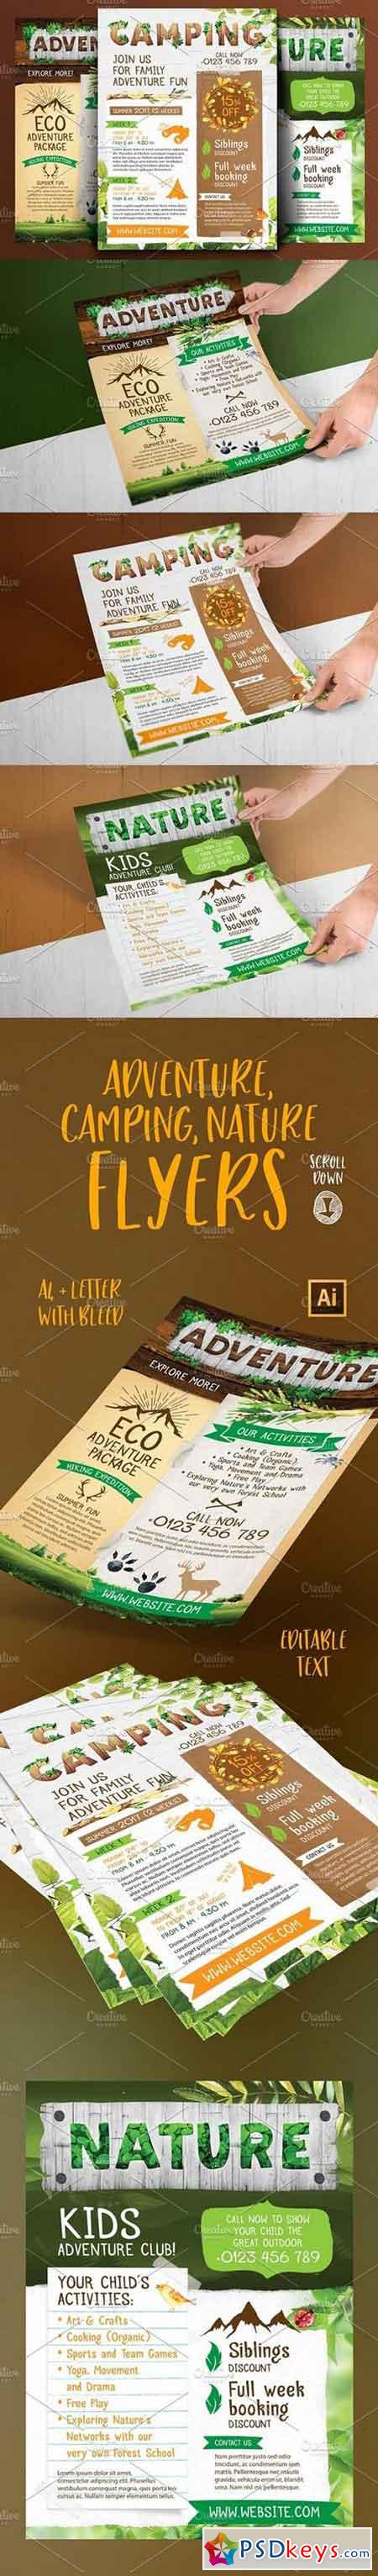 Adventure, camping, nature flyers 1586916